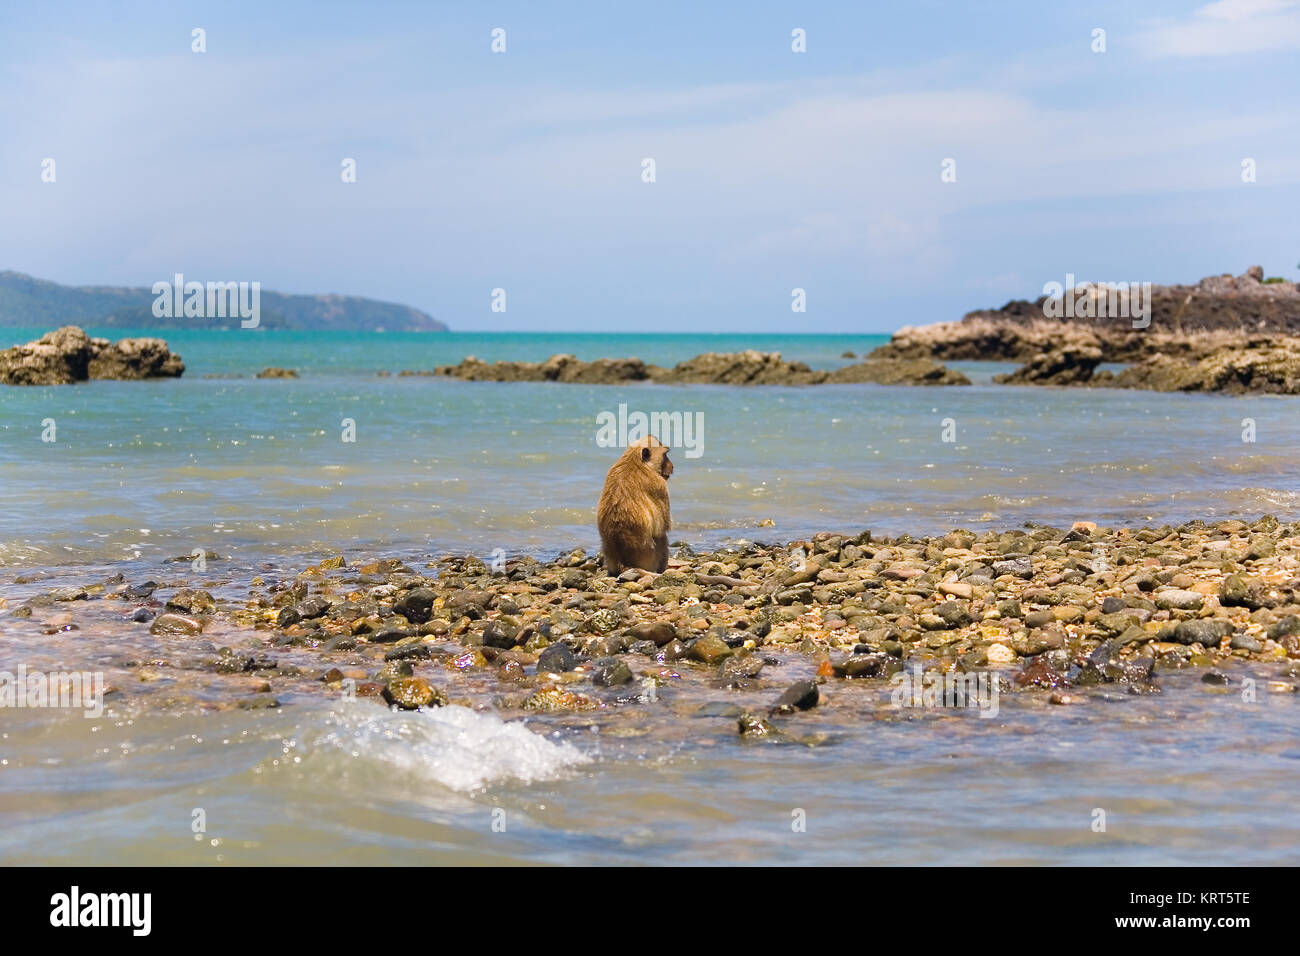 A lonely wild monkey sits on the shore of the ocean. Exotics. Stock Photo